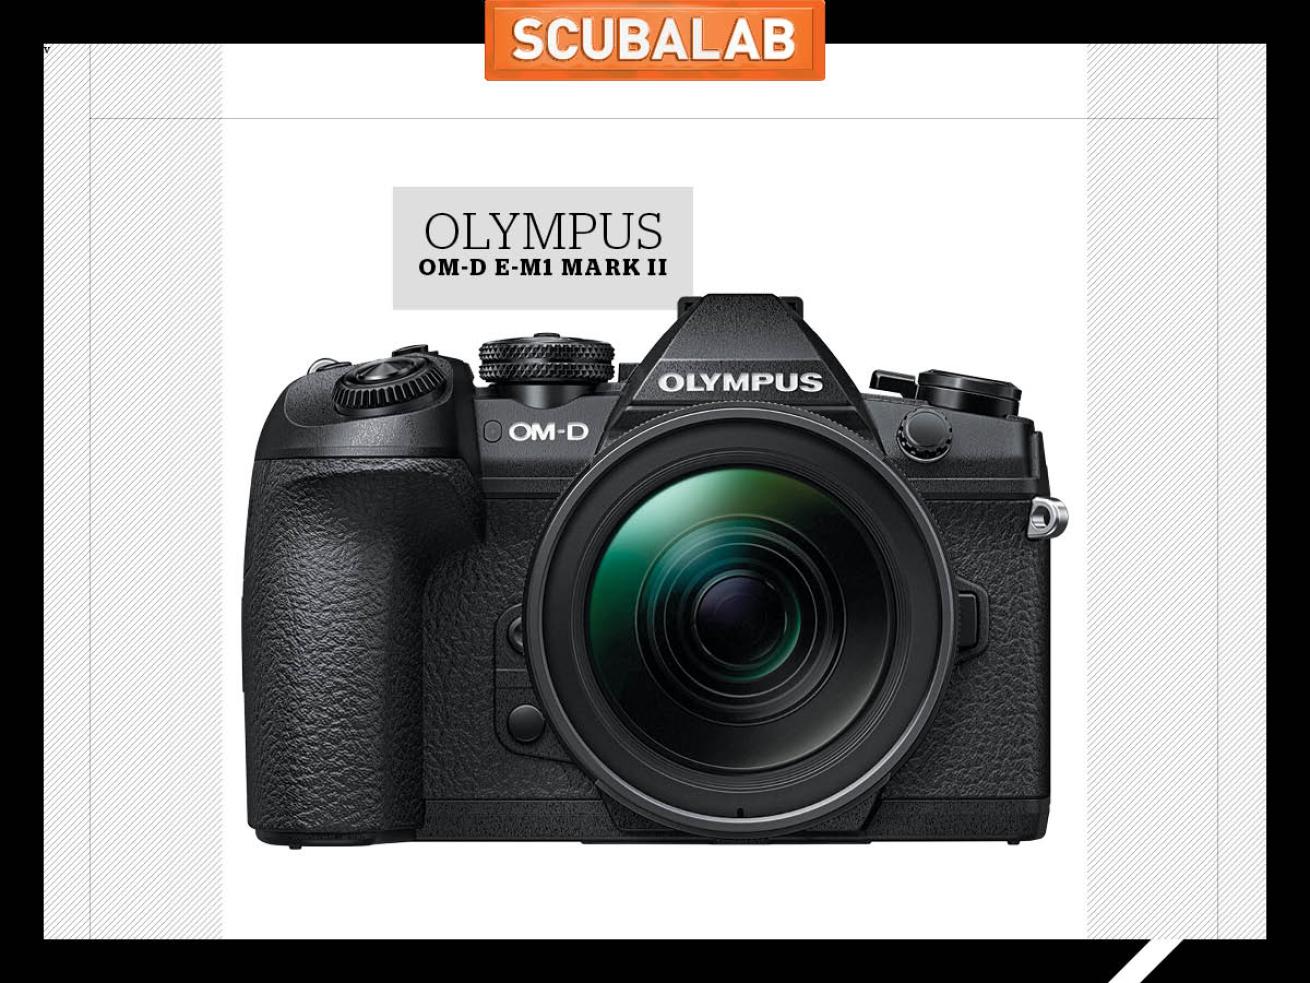 Olympus OM-D E-M1 Mark II camera for underwater photography